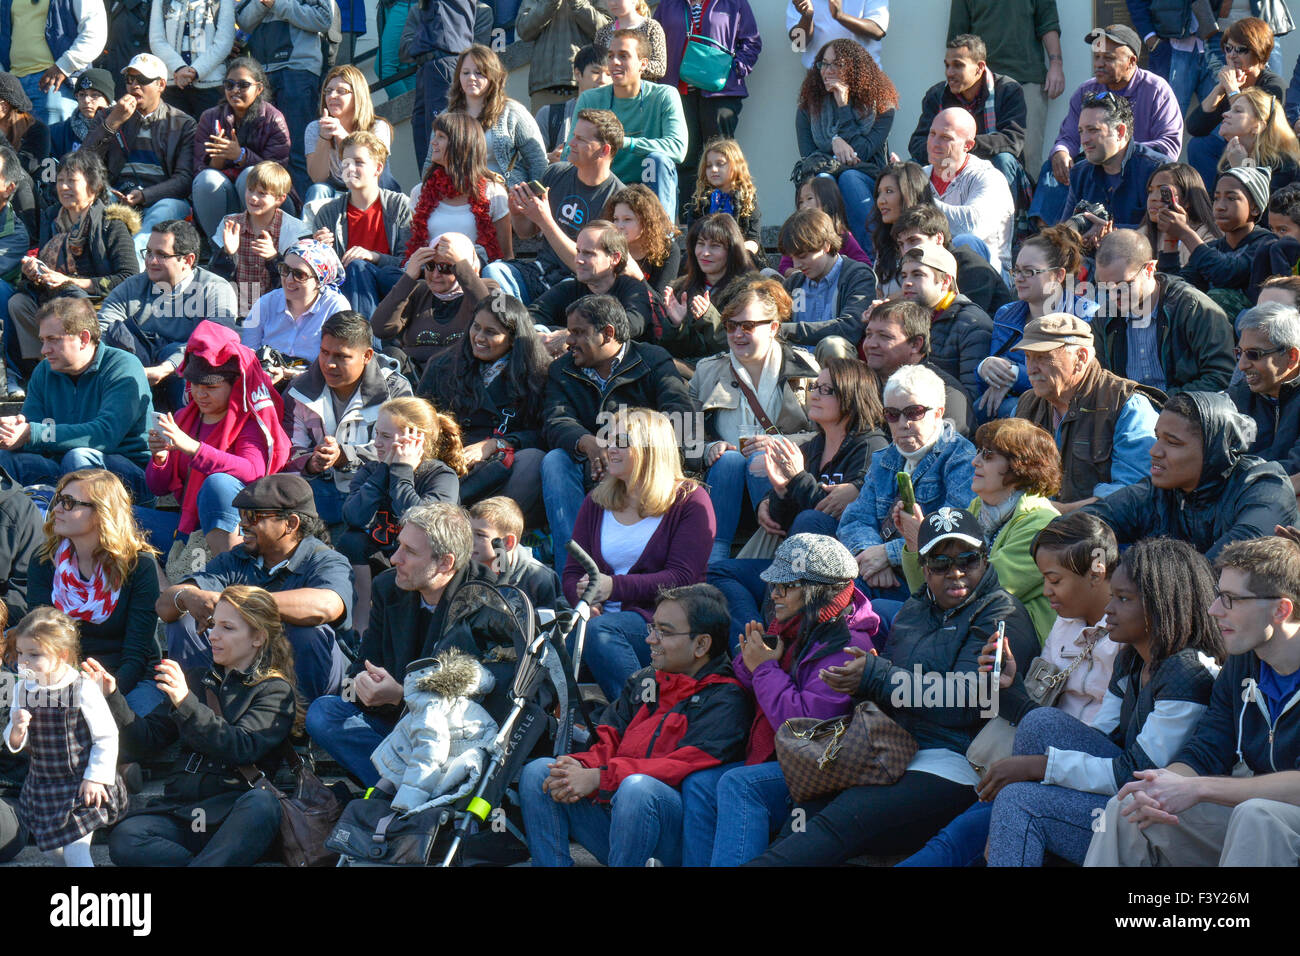 Multitude of diverse people in the USA sitting on bleachers reacting and watching an event Stock Photo